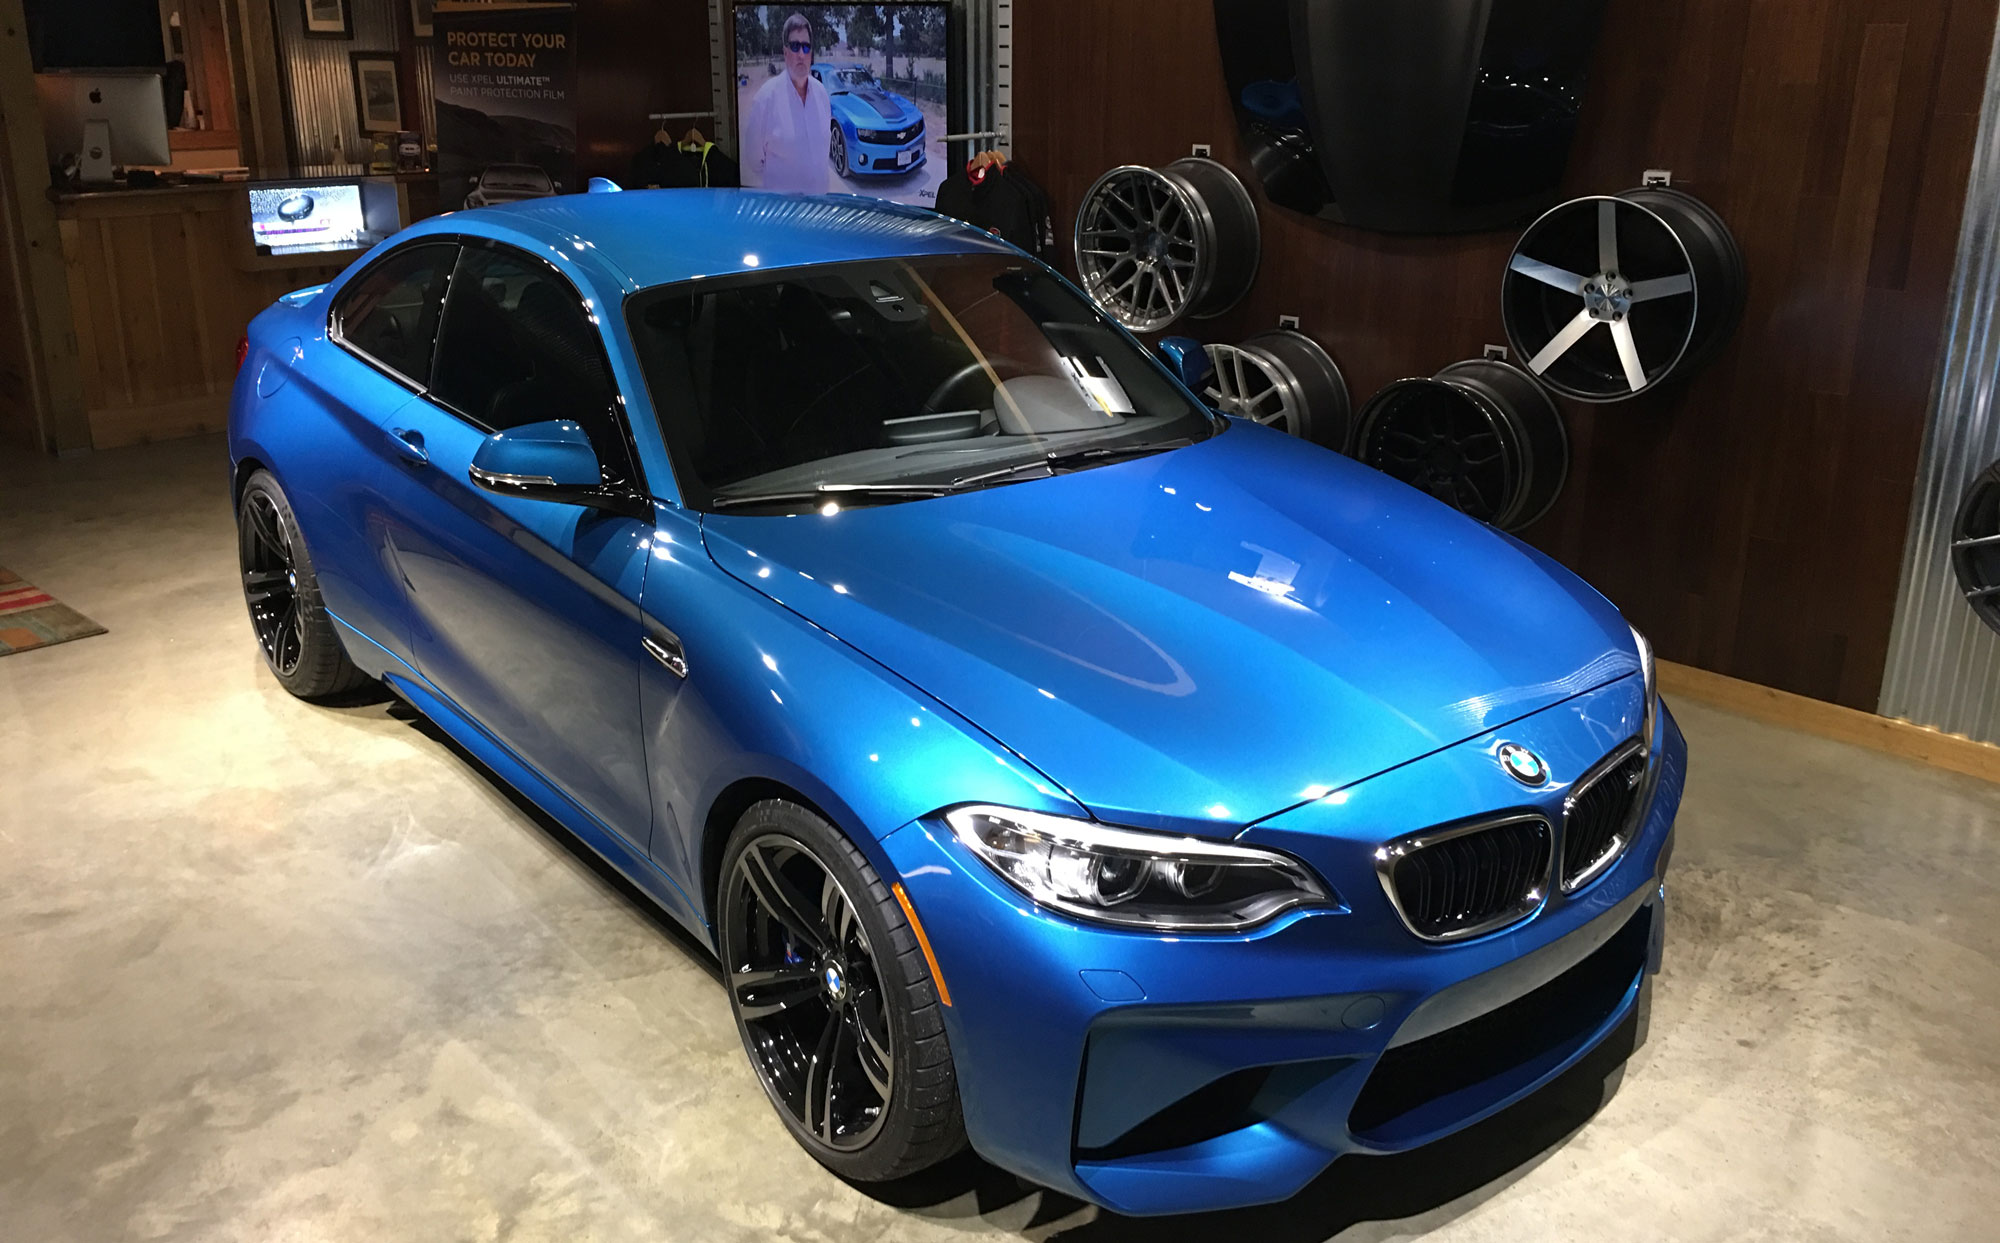 Does Paint Protection Film Really Work?